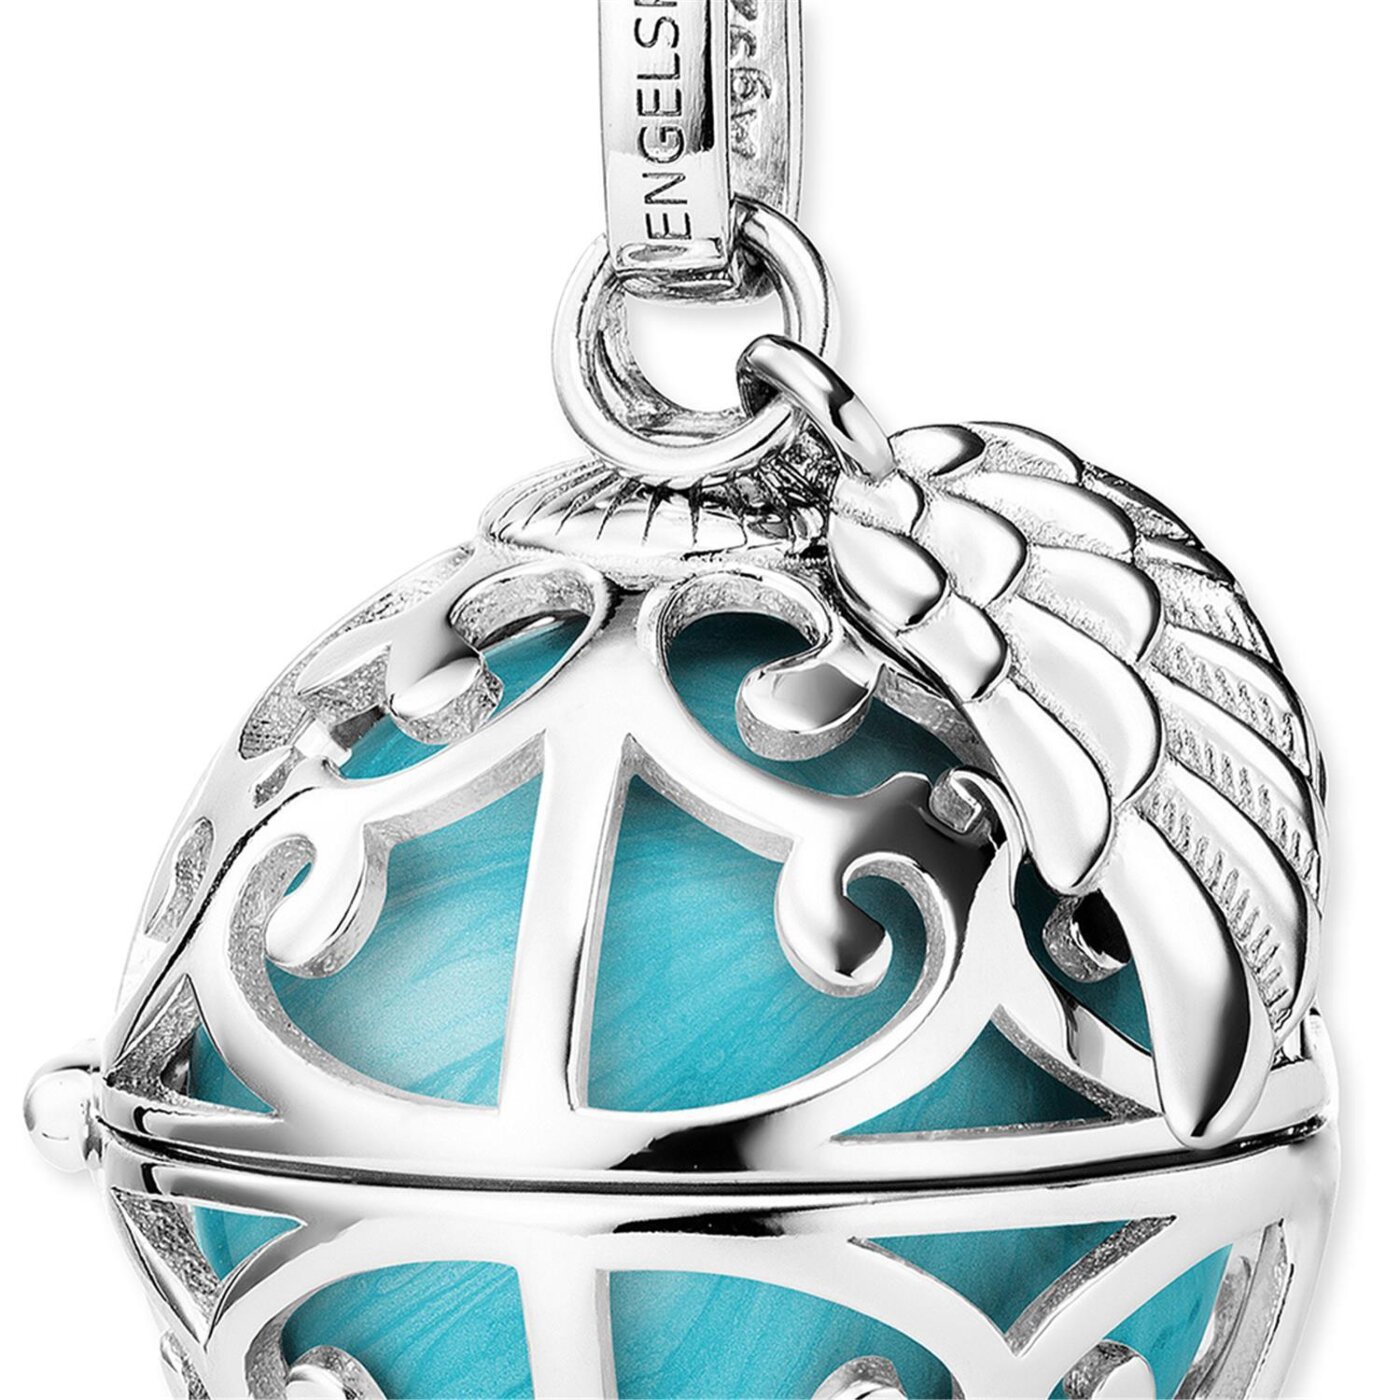 Angel caller sound ball pendant M ⌀19.5mm 925 silver mother-of-pearl turquoise